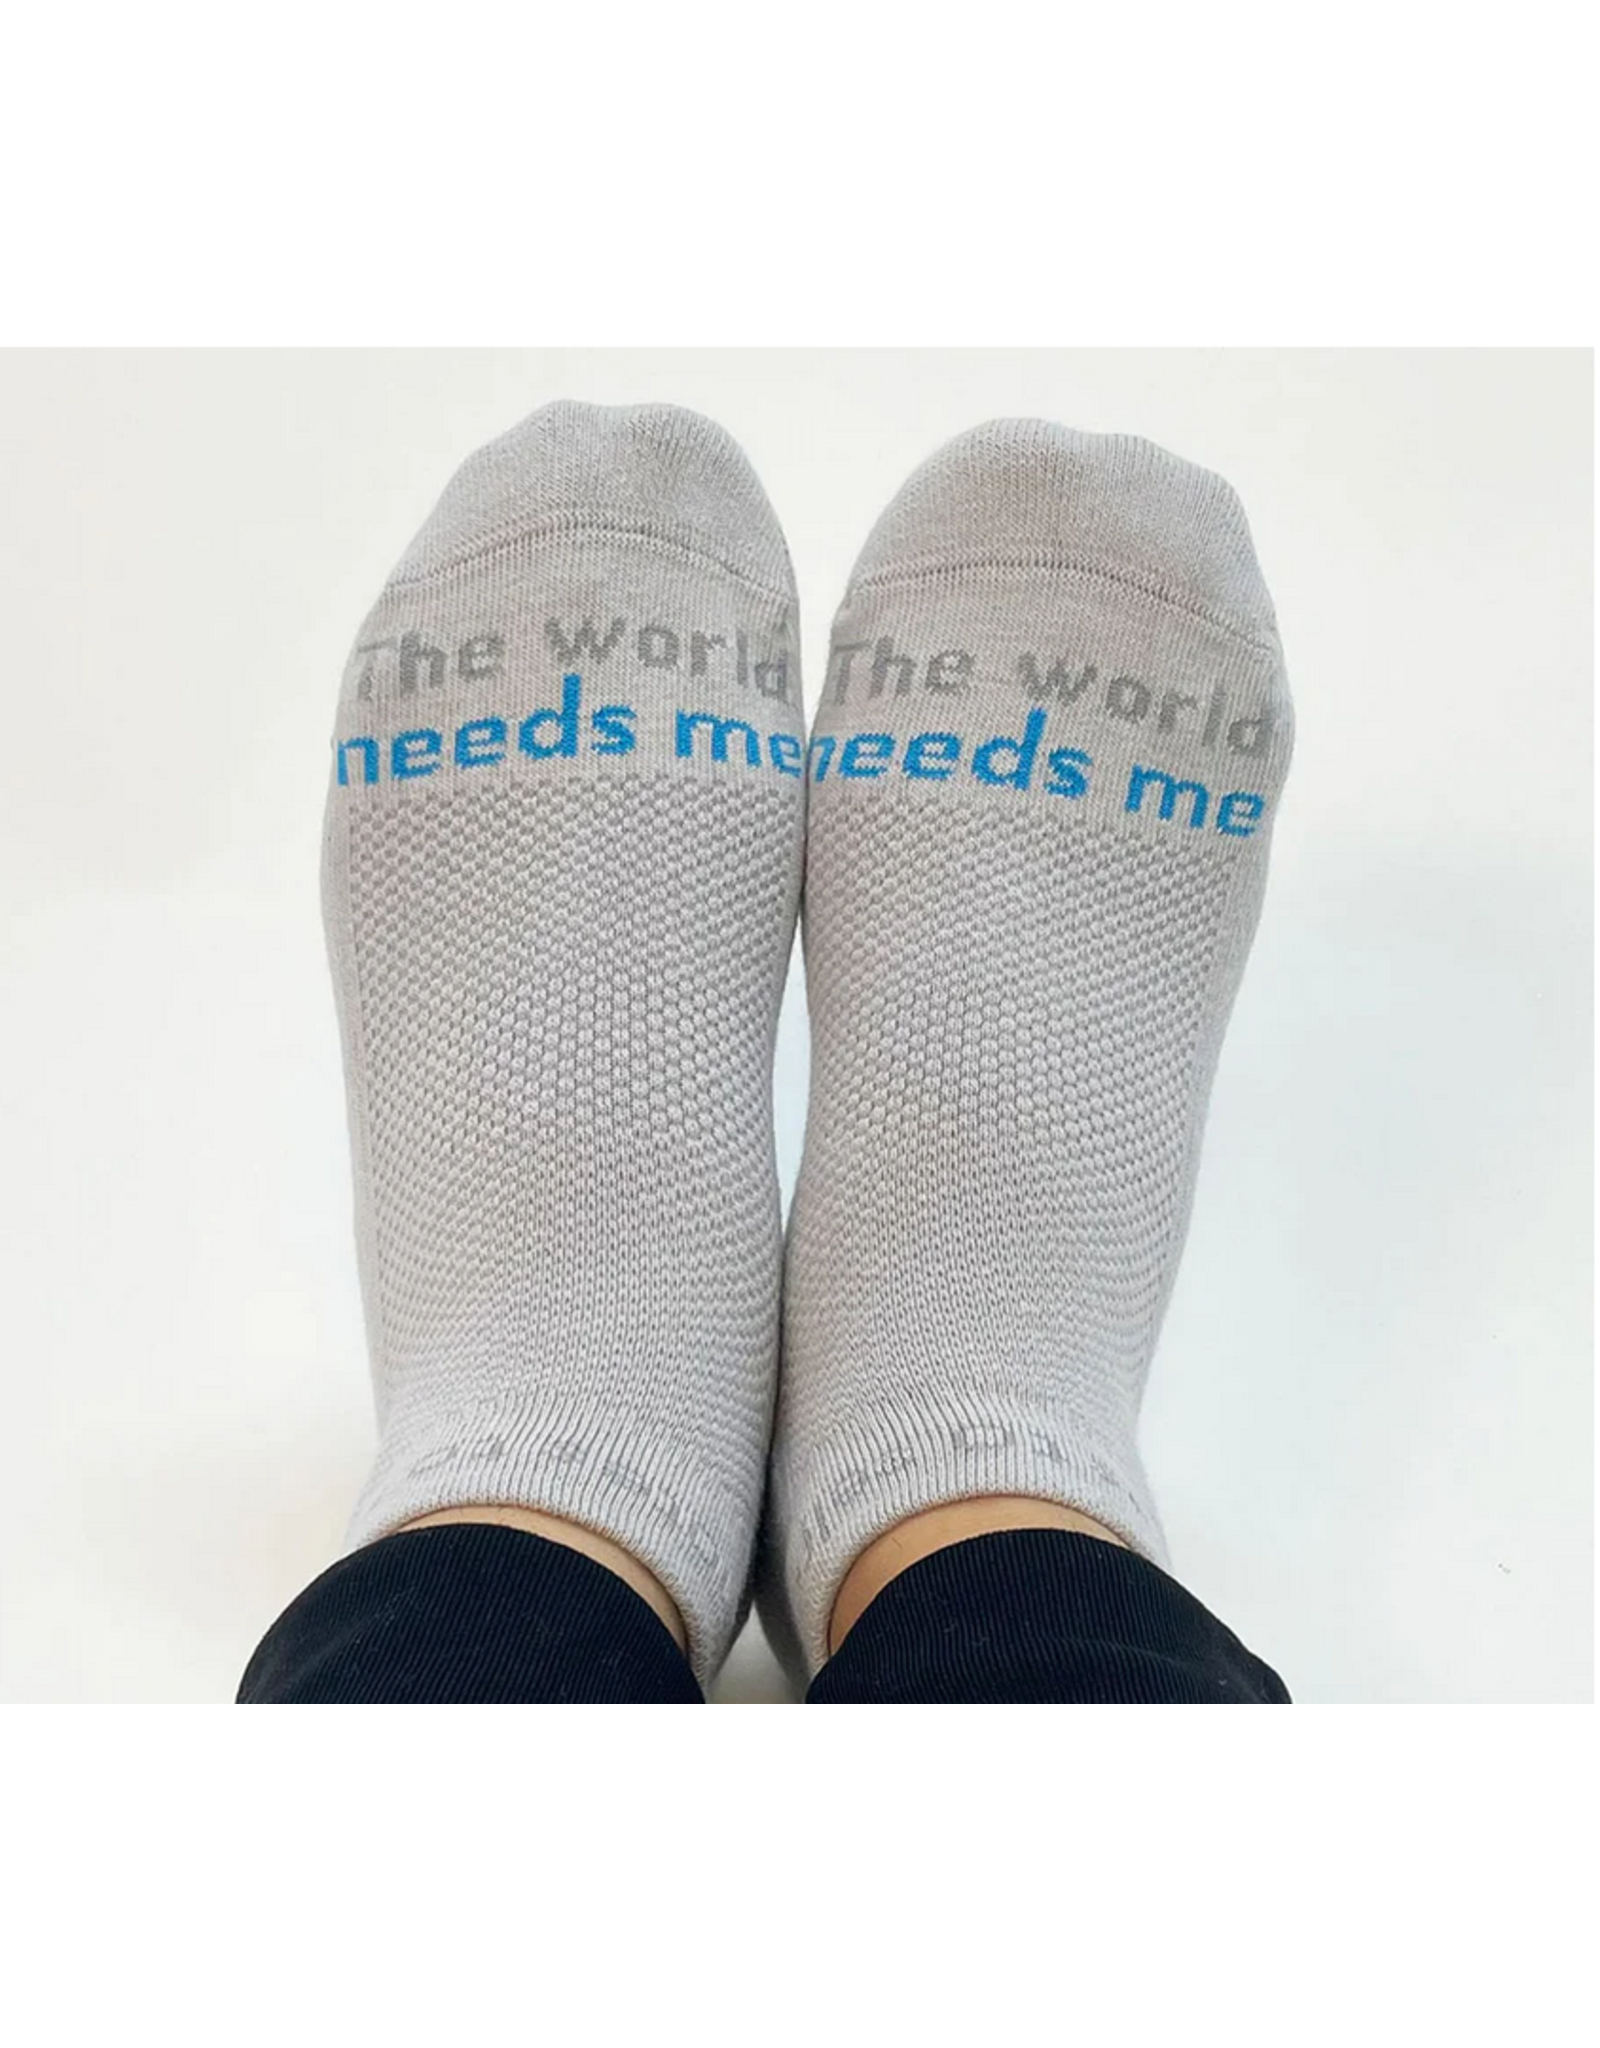 notes to self Notes to Self  'The world Needs Me' Low-Cut Socks